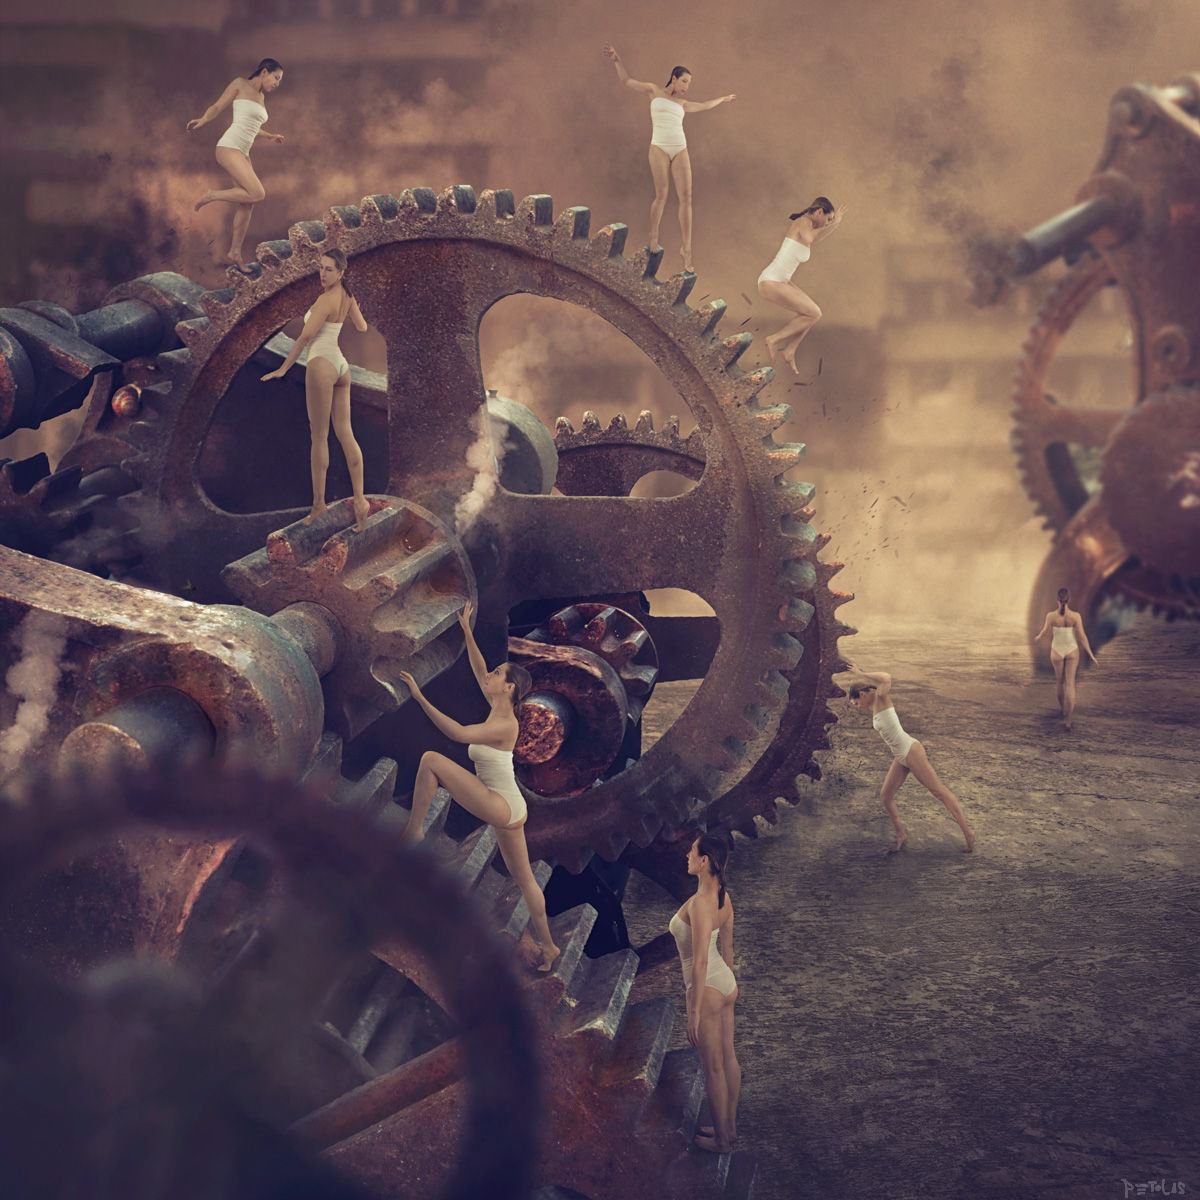 Impeller, limited edition of 7 by Nikolina Petolas